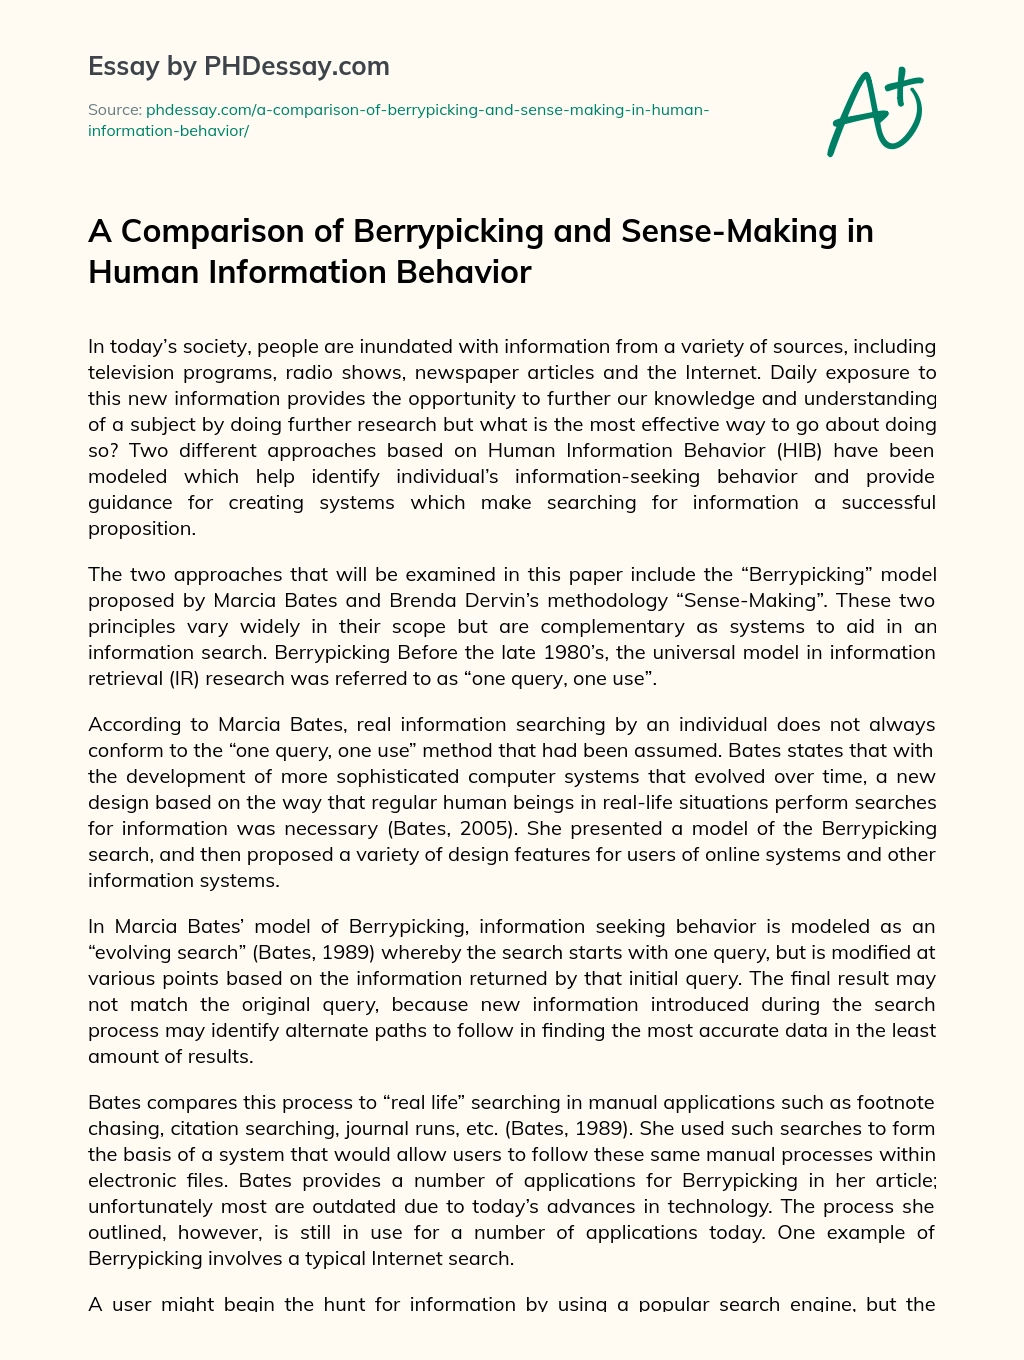 A Comparison of Berrypicking and Sense-Making in Human Information Behavior essay